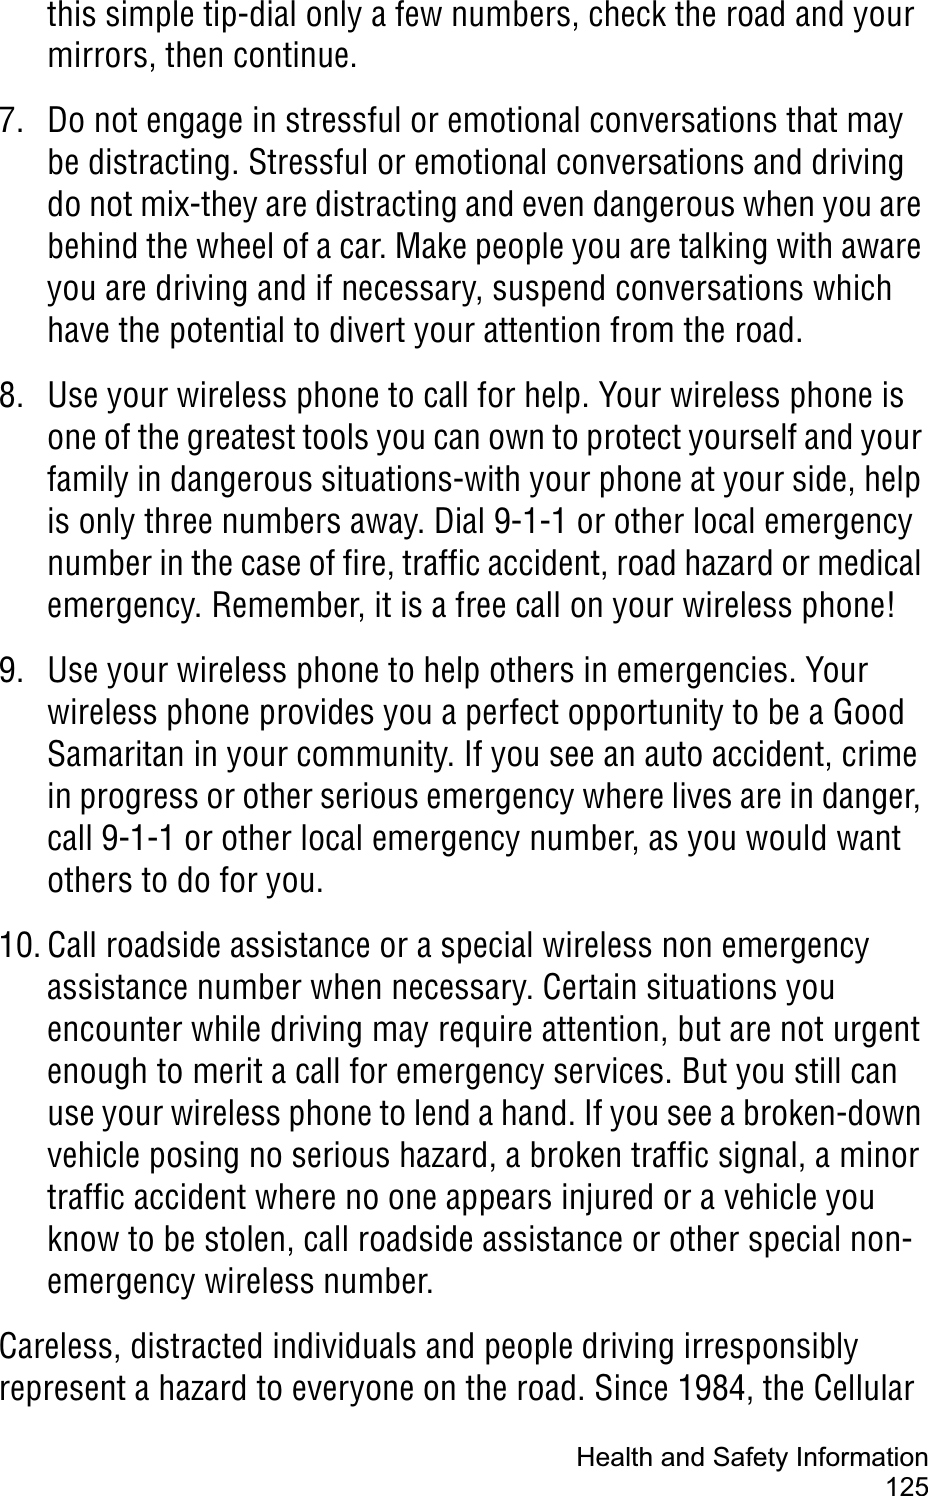 Health and Safety Information125this simple tip-dial only a few numbers, check the road and your mirrors, then continue.7. Do not engage in stressful or emotional conversations that may be distracting. Stressful or emotional conversations and driving do not mix-they are distracting and even dangerous when you are behind the wheel of a car. Make people you are talking with aware you are driving and if necessary, suspend conversations which have the potential to divert your attention from the road.8. Use your wireless phone to call for help. Your wireless phone is one of the greatest tools you can own to protect yourself and your family in dangerous situations-with your phone at your side, help is only three numbers away. Dial 9-1-1 or other local emergency number in the case of fire, traffic accident, road hazard or medical emergency. Remember, it is a free call on your wireless phone!9. Use your wireless phone to help others in emergencies. Your wireless phone provides you a perfect opportunity to be a Good Samaritan in your community. If you see an auto accident, crime in progress or other serious emergency where lives are in danger, call 9-1-1 or other local emergency number, as you would want others to do for you.10. Call roadside assistance or a special wireless non emergency assistance number when necessary. Certain situations you encounter while driving may require attention, but are not urgent enough to merit a call for emergency services. But you still can use your wireless phone to lend a hand. If you see a broken-down vehicle posing no serious hazard, a broken traffic signal, a minor traffic accident where no one appears injured or a vehicle you know to be stolen, call roadside assistance or other special non-emergency wireless number.Careless, distracted individuals and people driving irresponsibly represent a hazard to everyone on the road. Since 1984, the Cellular 